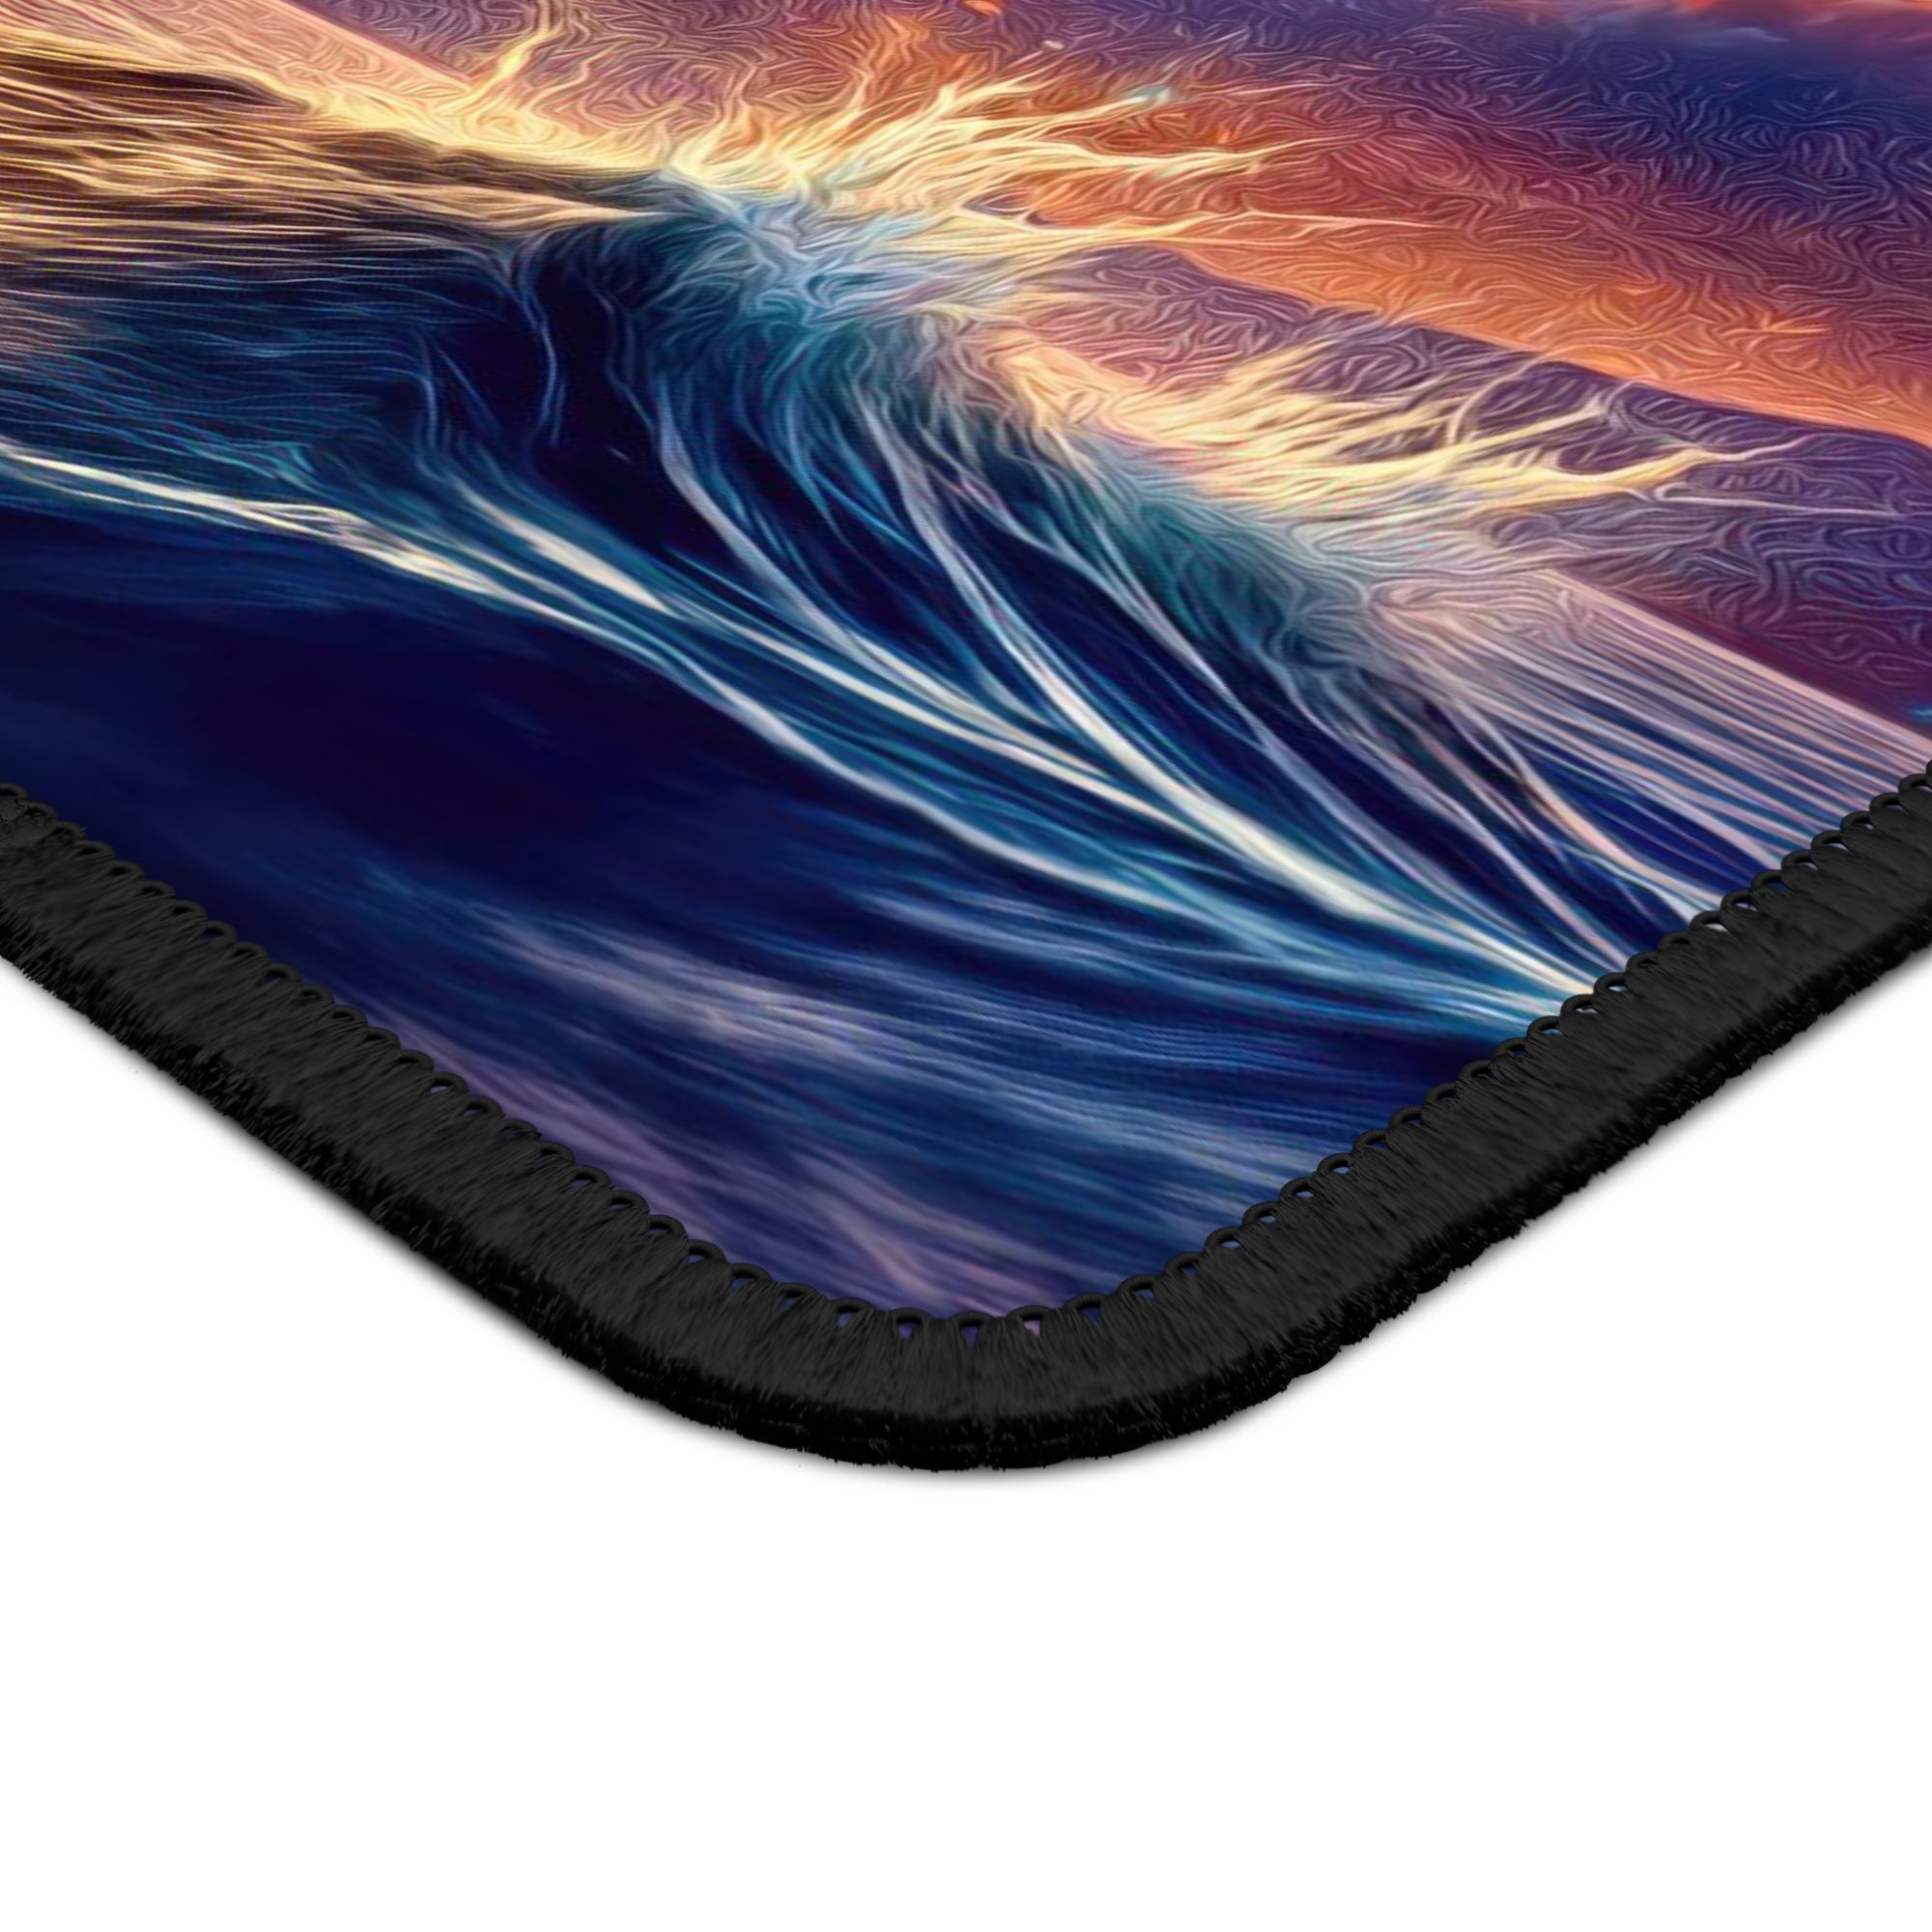 A Leap Through Starlit Seas Gaming Mouse Pad